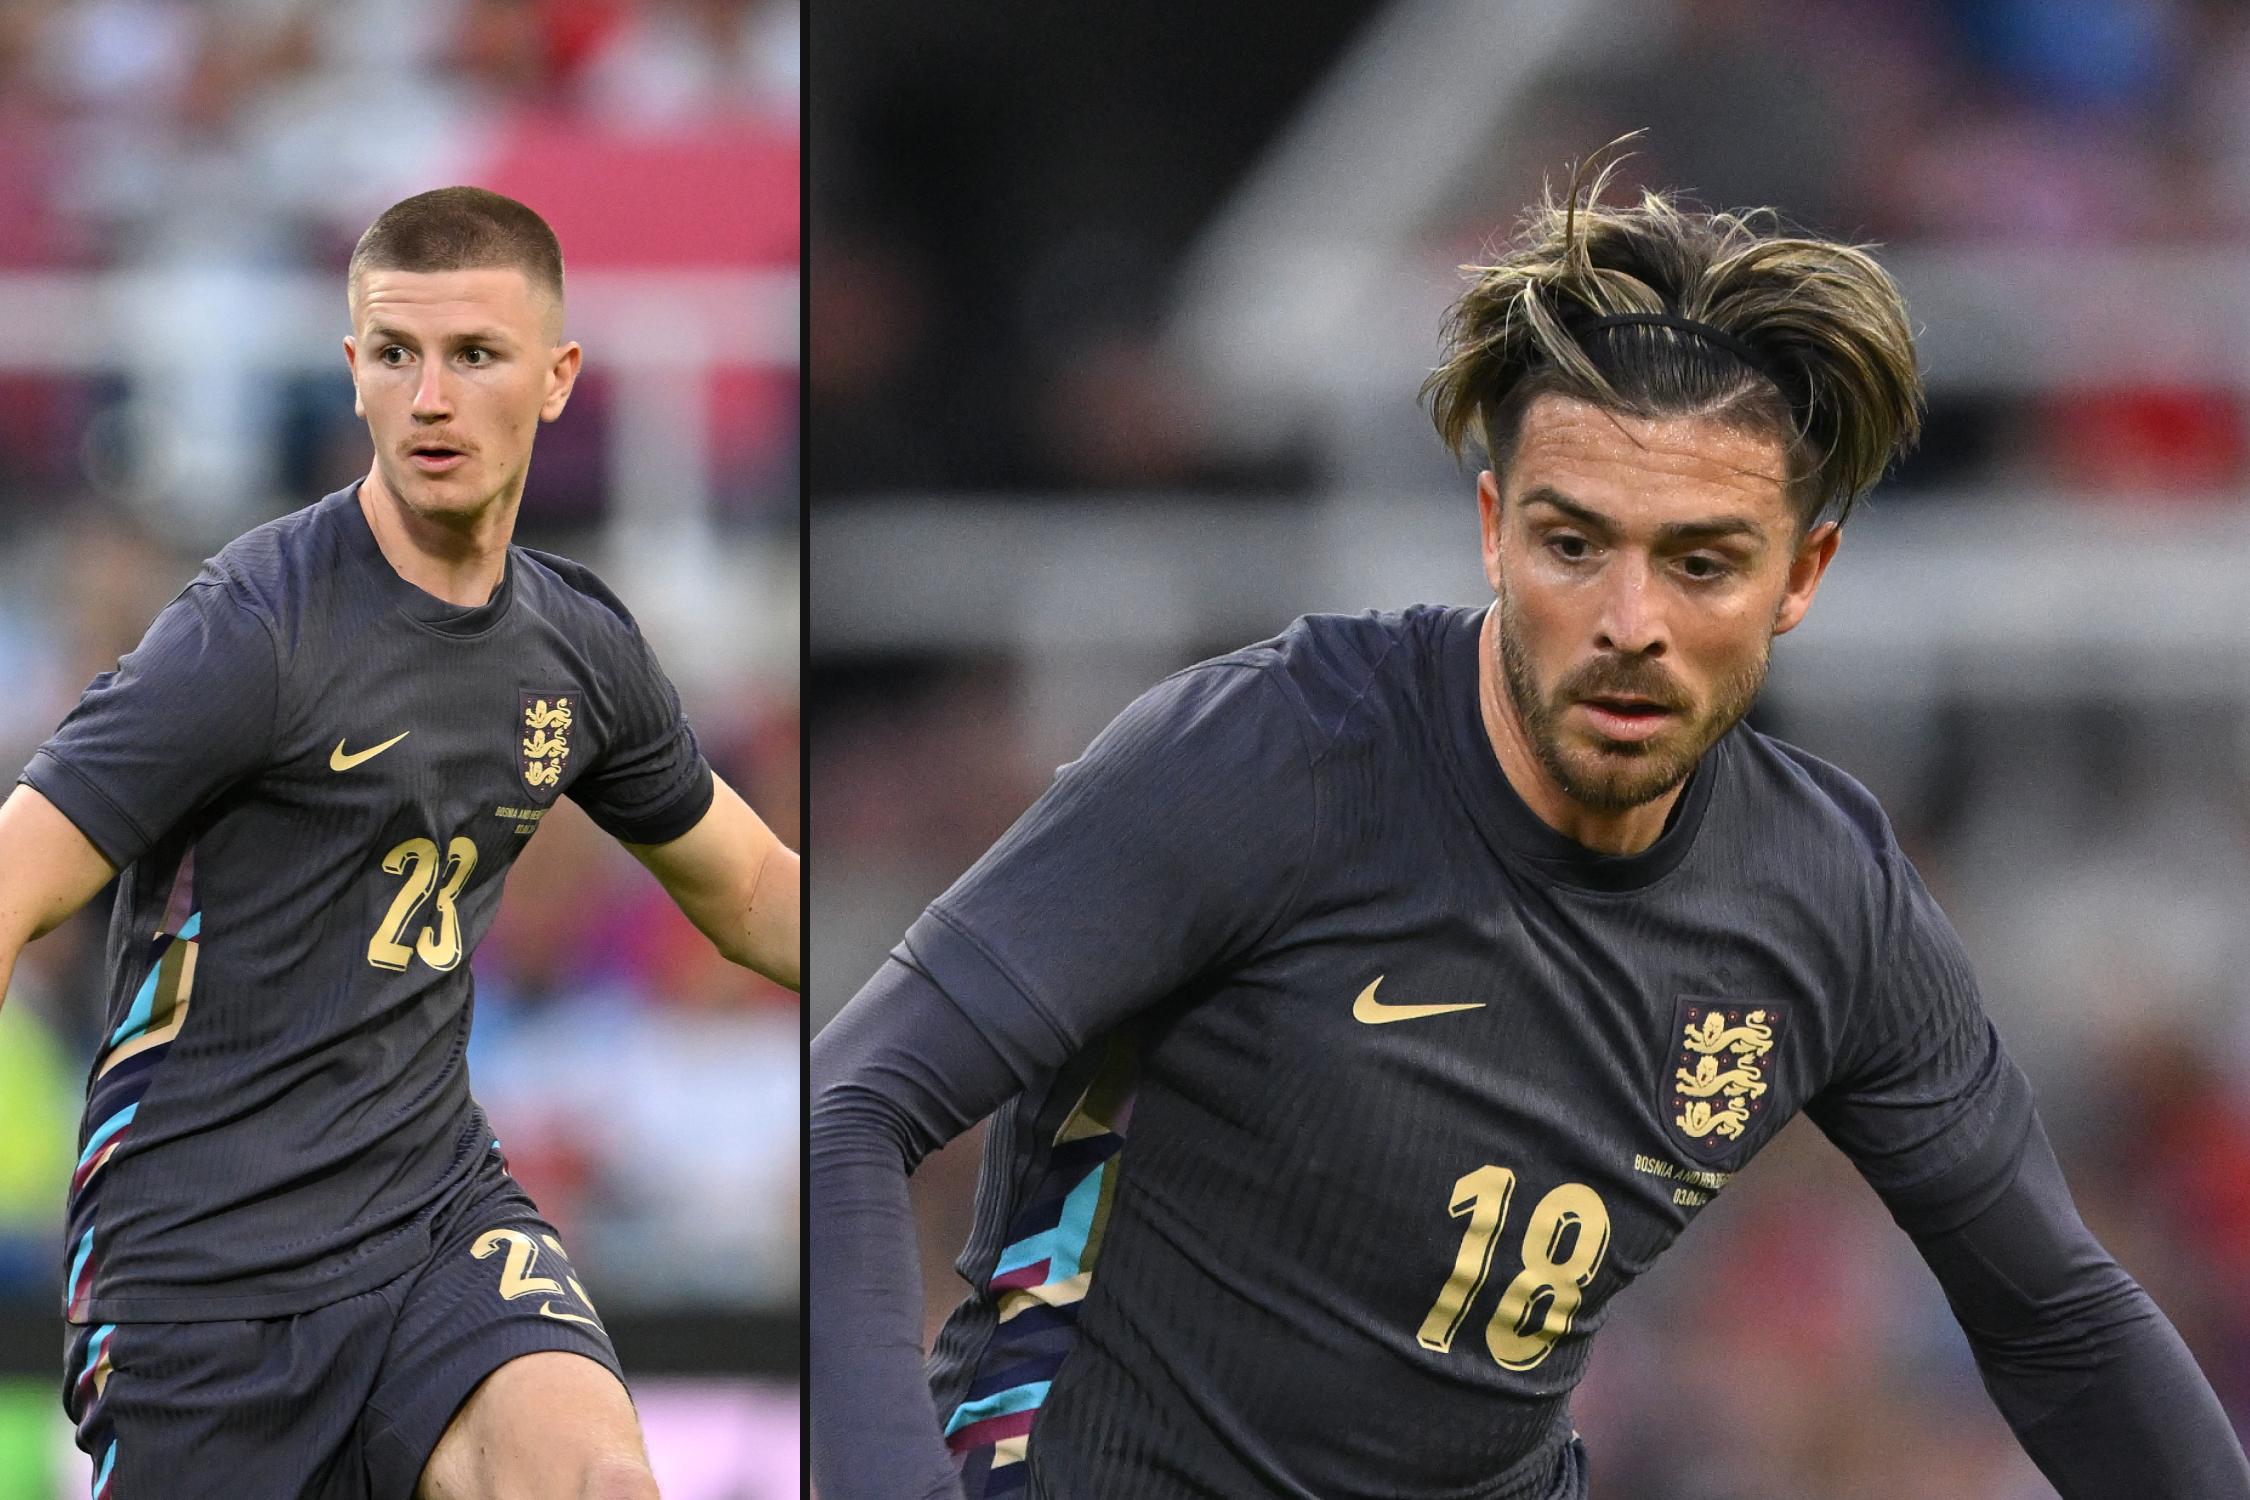 England's Euro squad: Who to cull and who to keep? Our writers make their selections